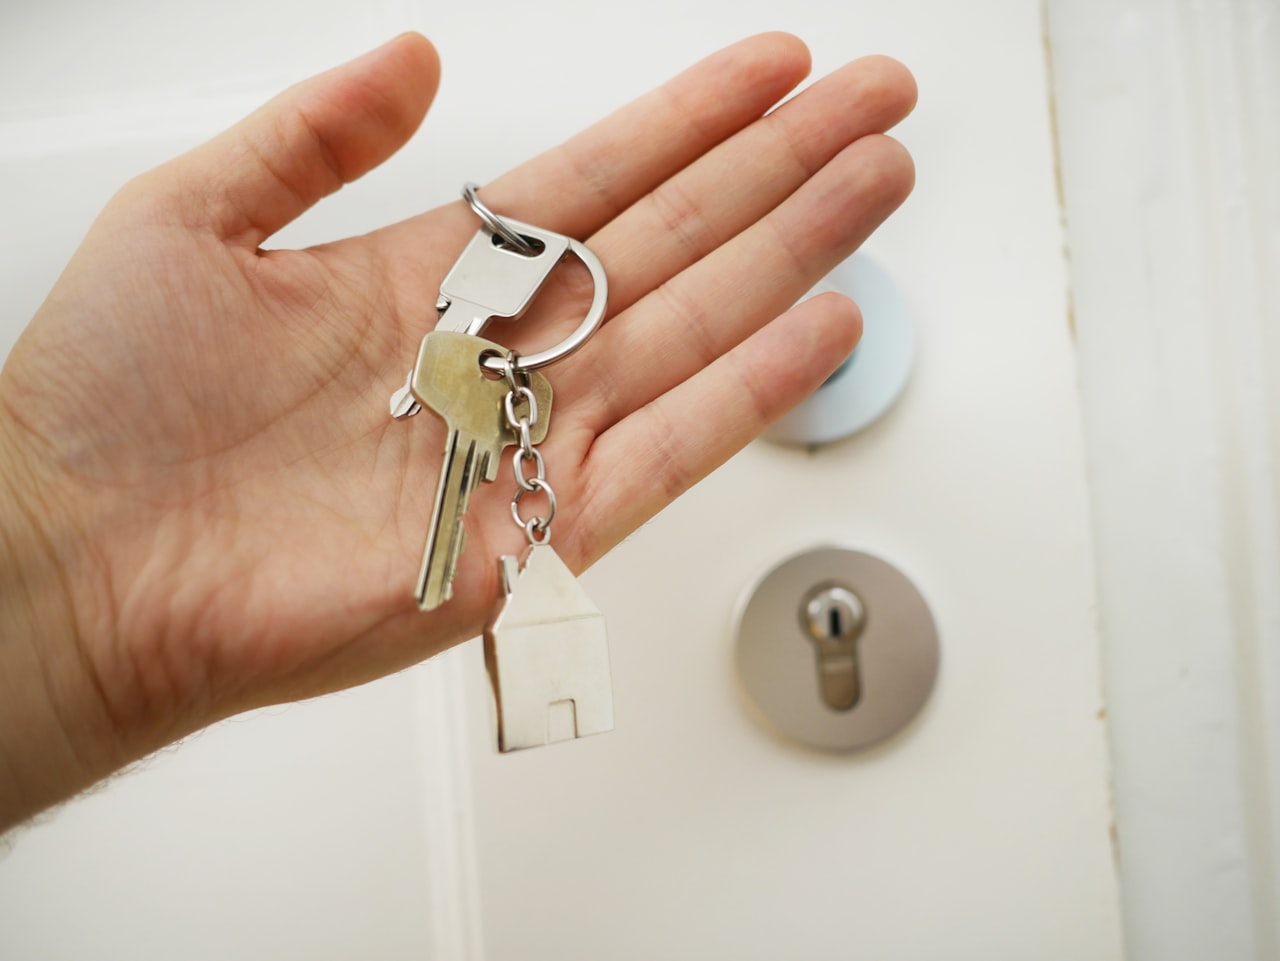 What is THE biggest mistake homebuyers make when thinking about buying versus renting? 